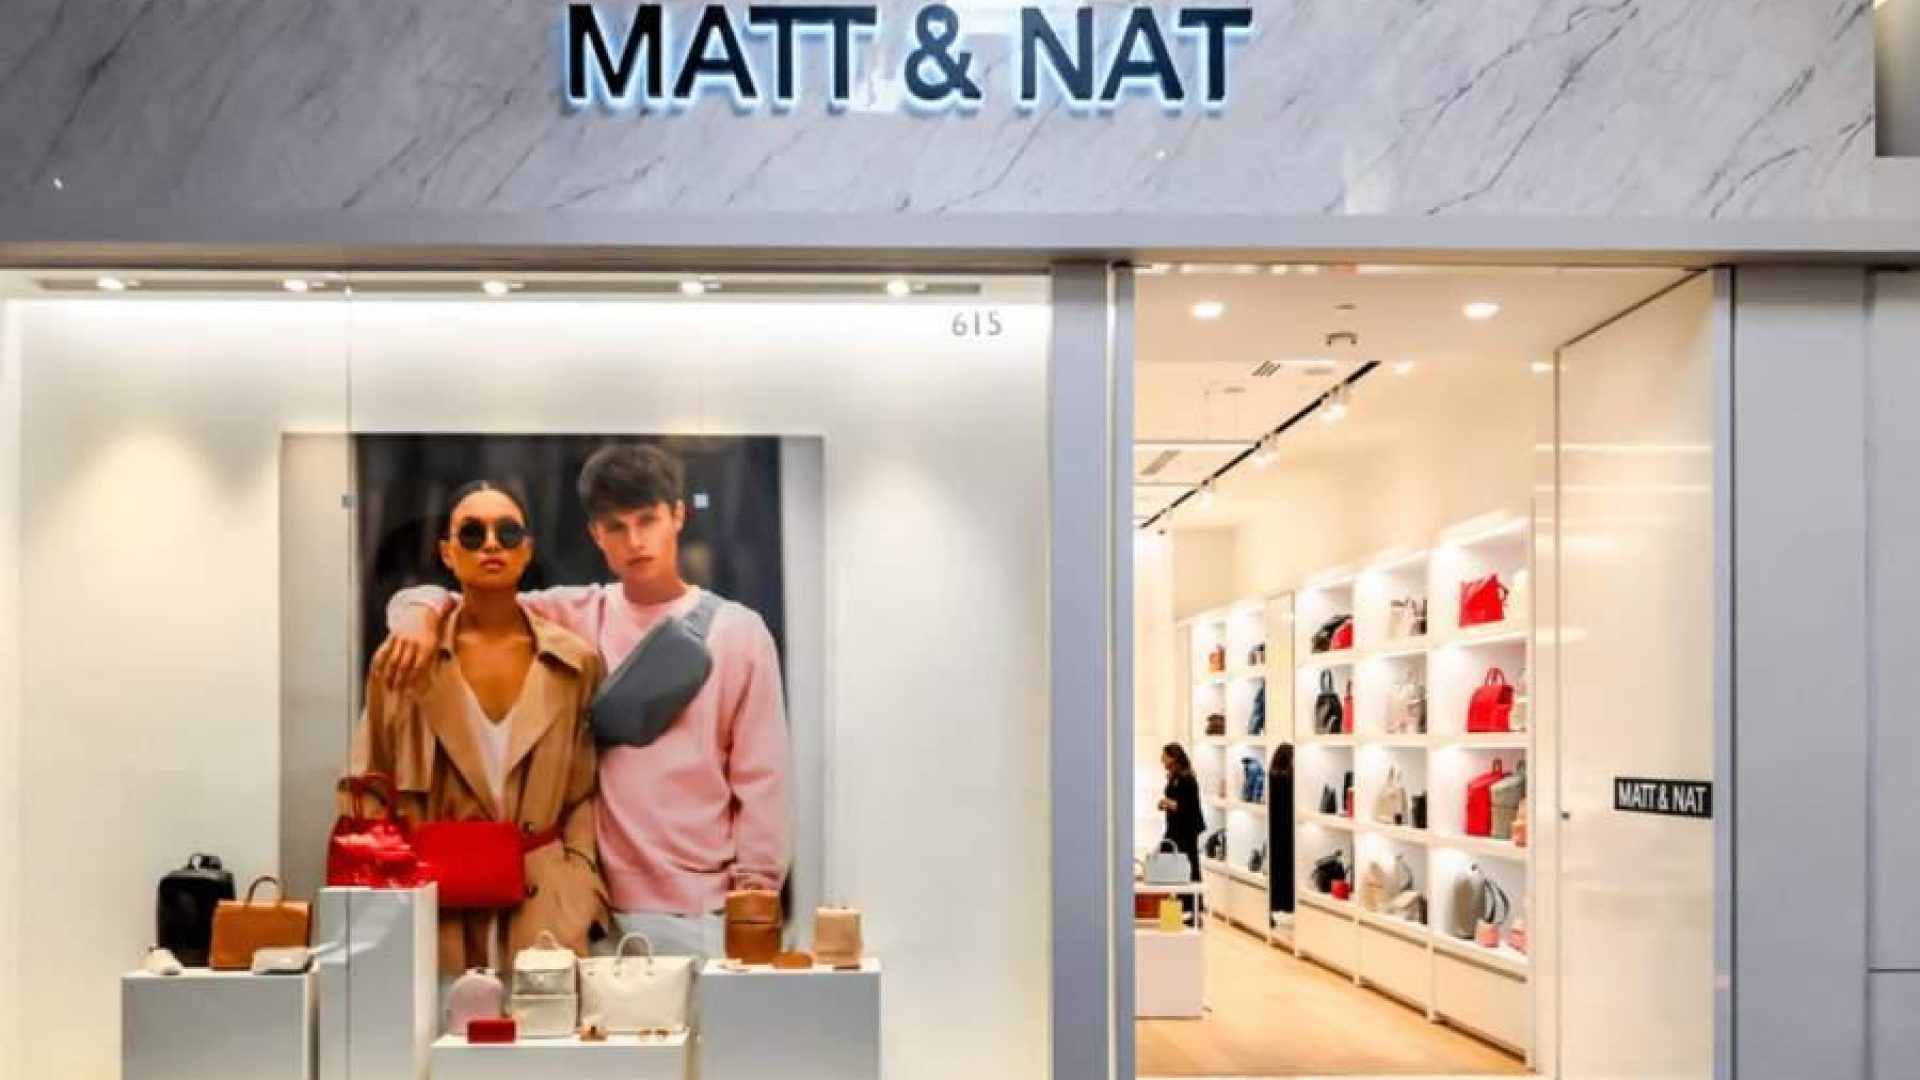 Honest Matt and Nat Review: Is it Worth the Buy in 2022?